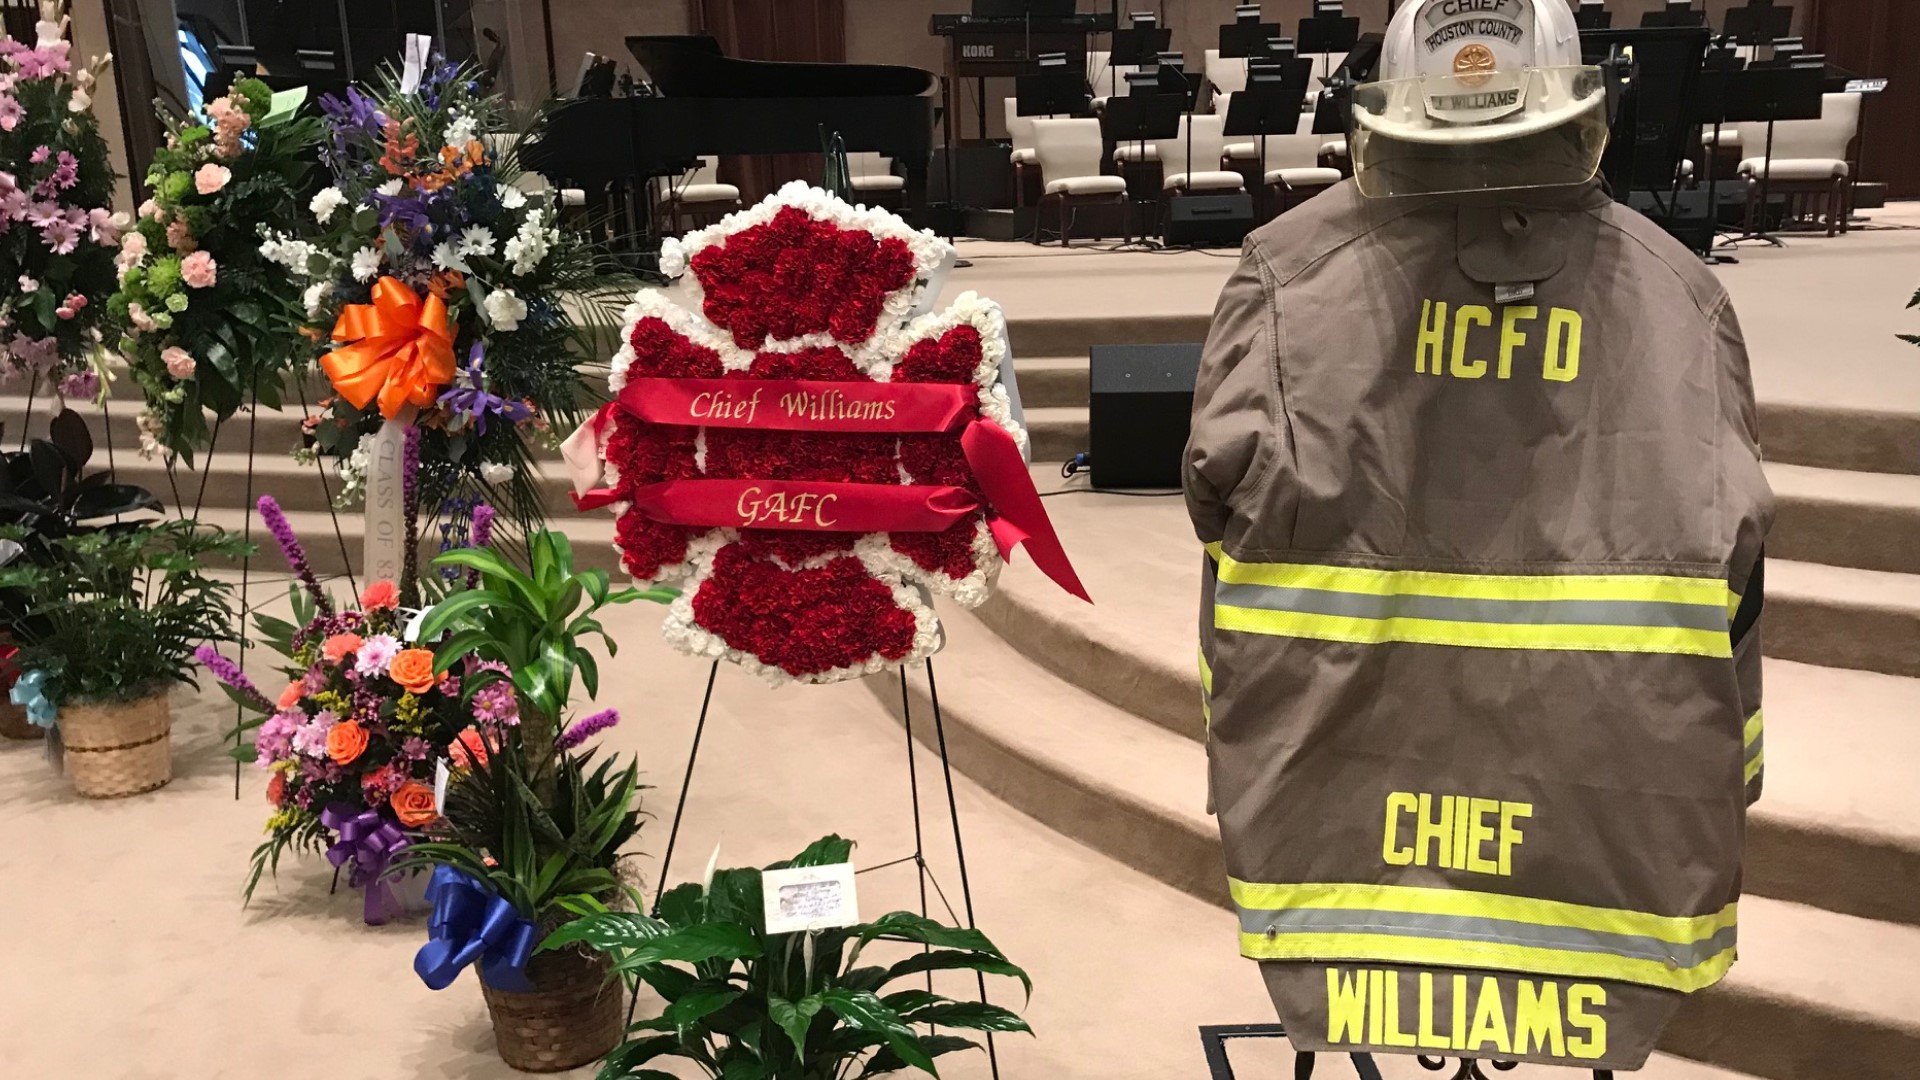 Houston County Fire Chief and EMA Director Jimmy Williams died after a battle with pancreatic cancer earlier this week